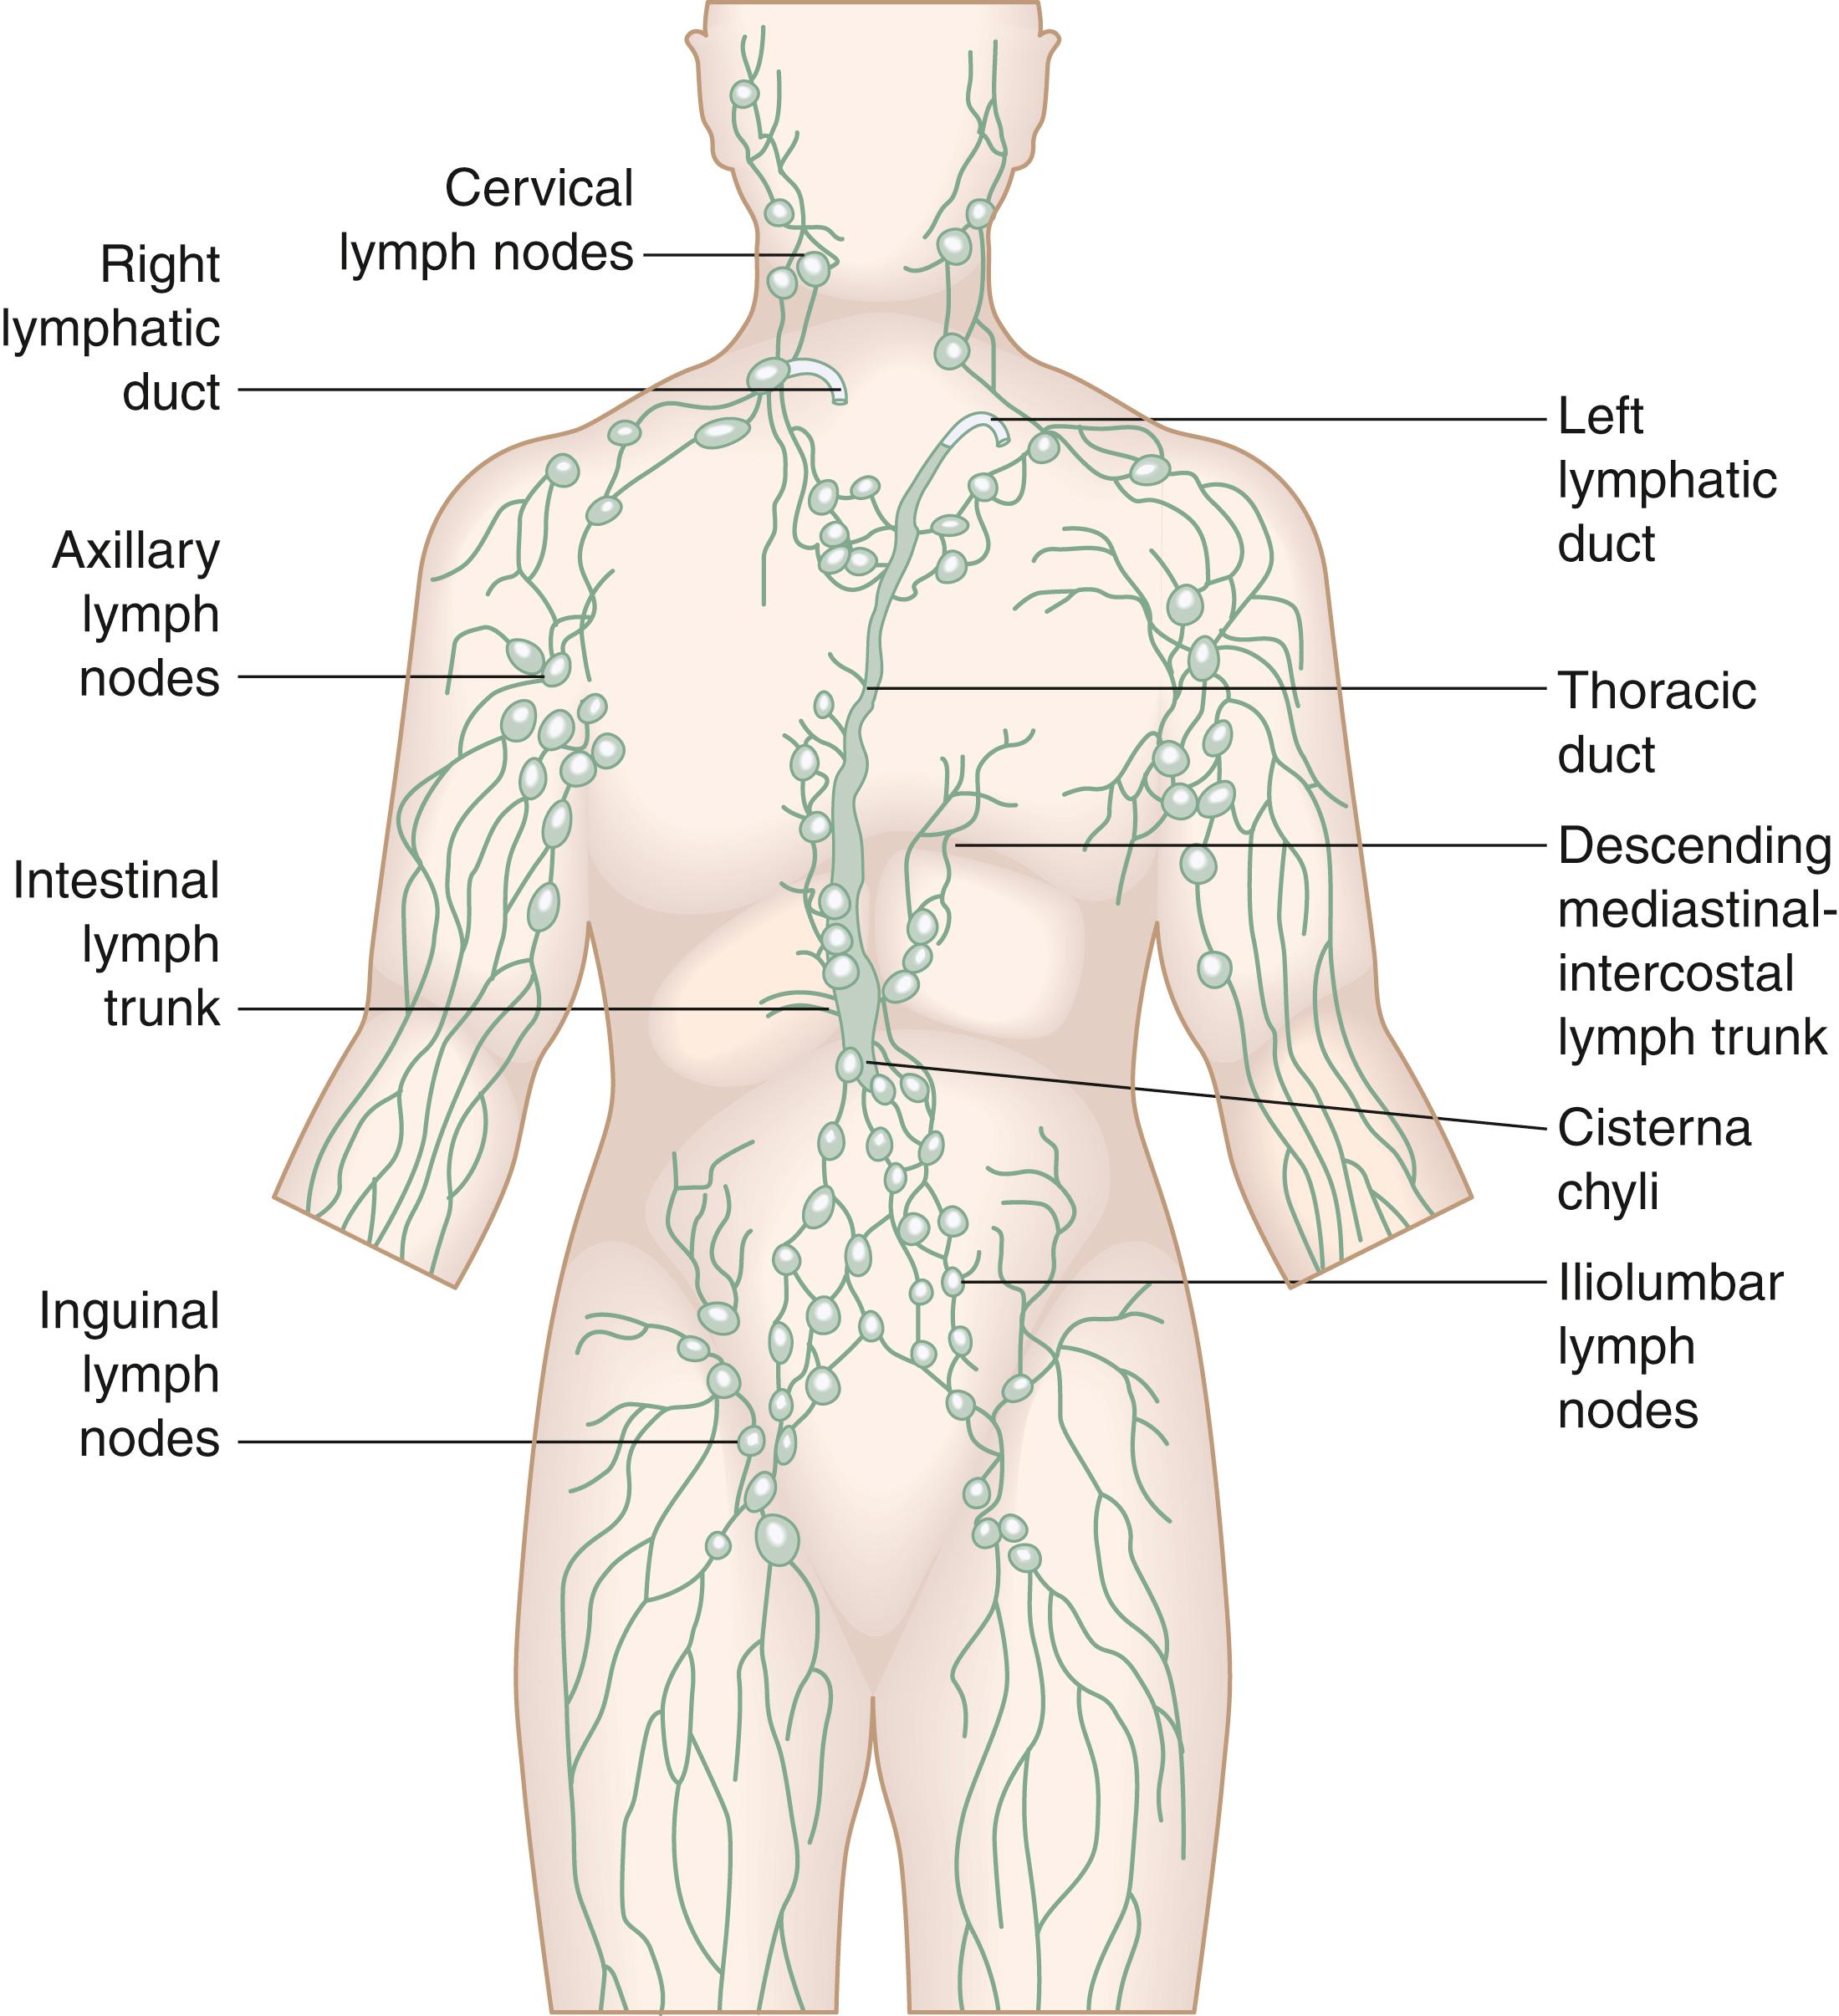 Fig. 66.1, Major anatomic pathways and lymph node groups of the lymphatic system.